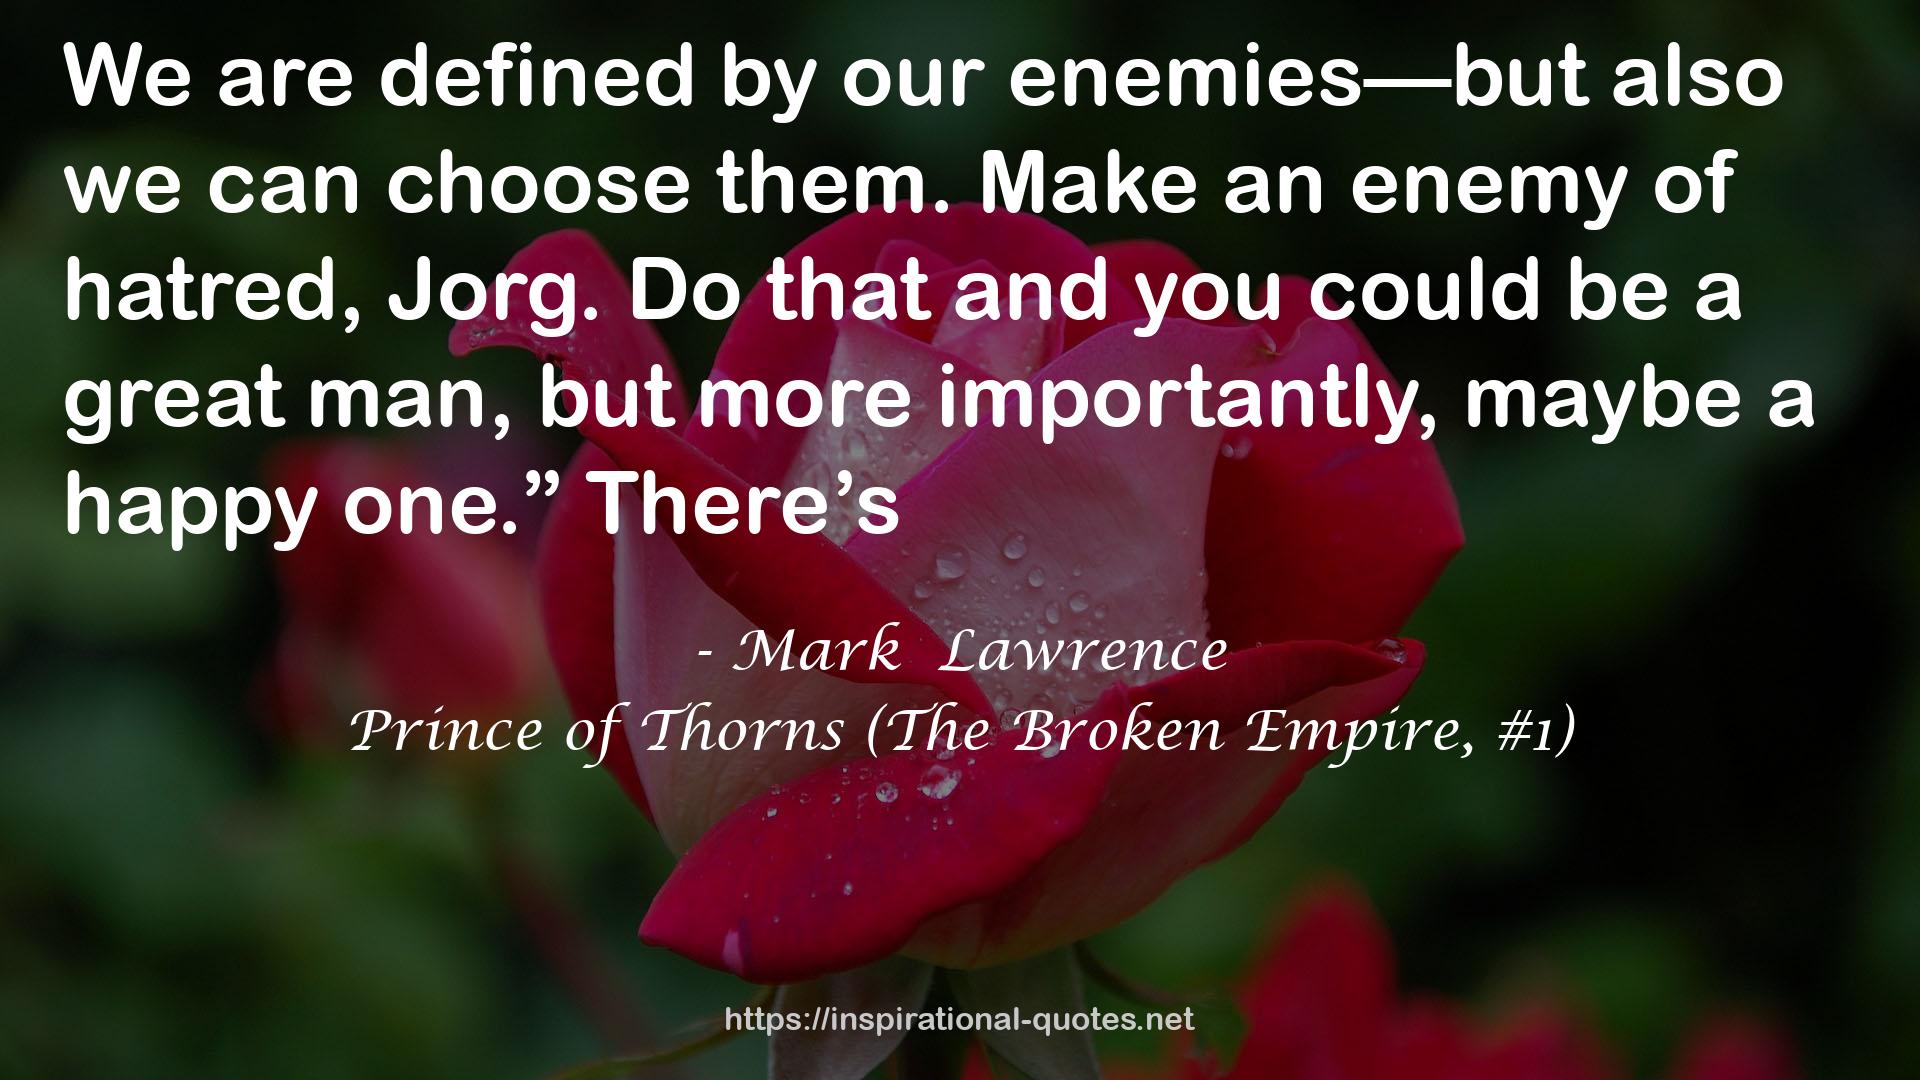 Prince of Thorns (The Broken Empire, #1) QUOTES